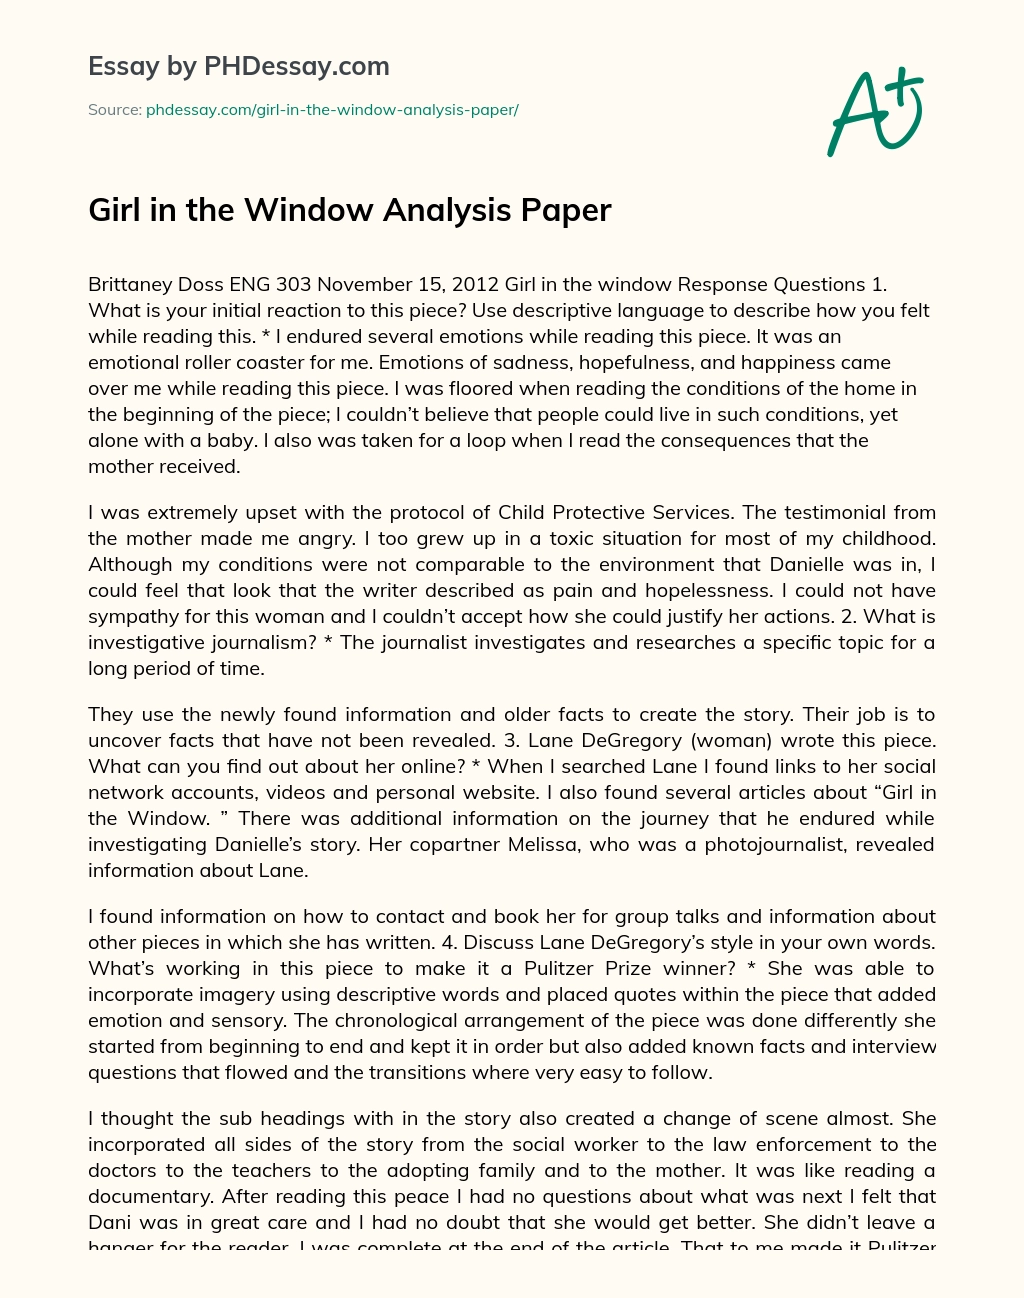 Girl in the Window Analysis Paper essay